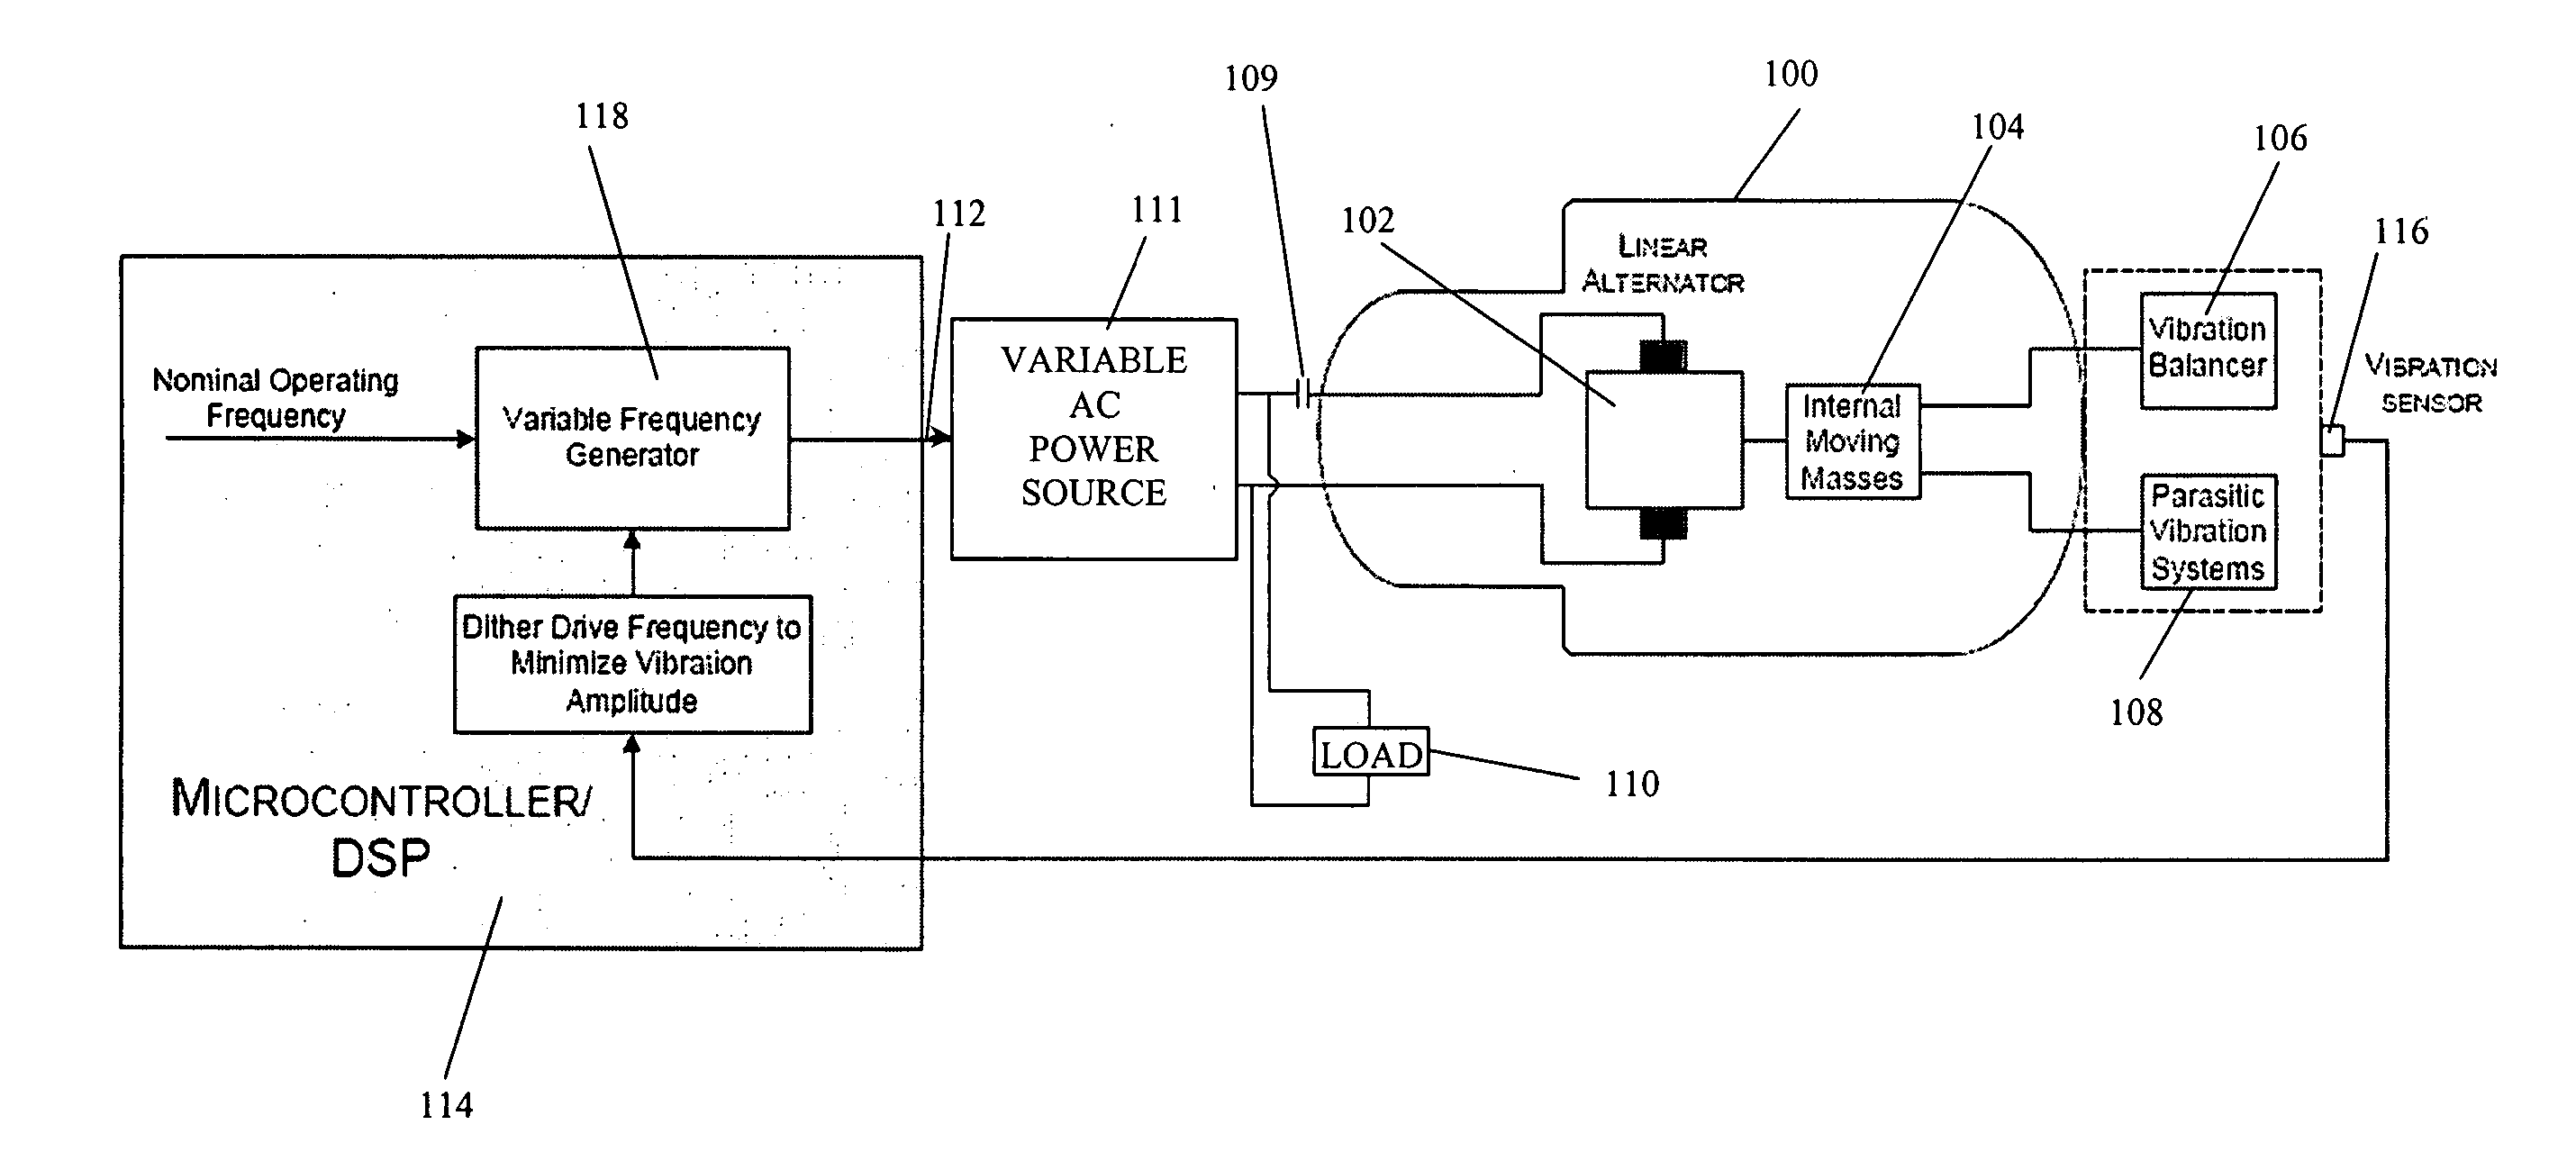 Vibration control of free piston machines through frequency adjustment